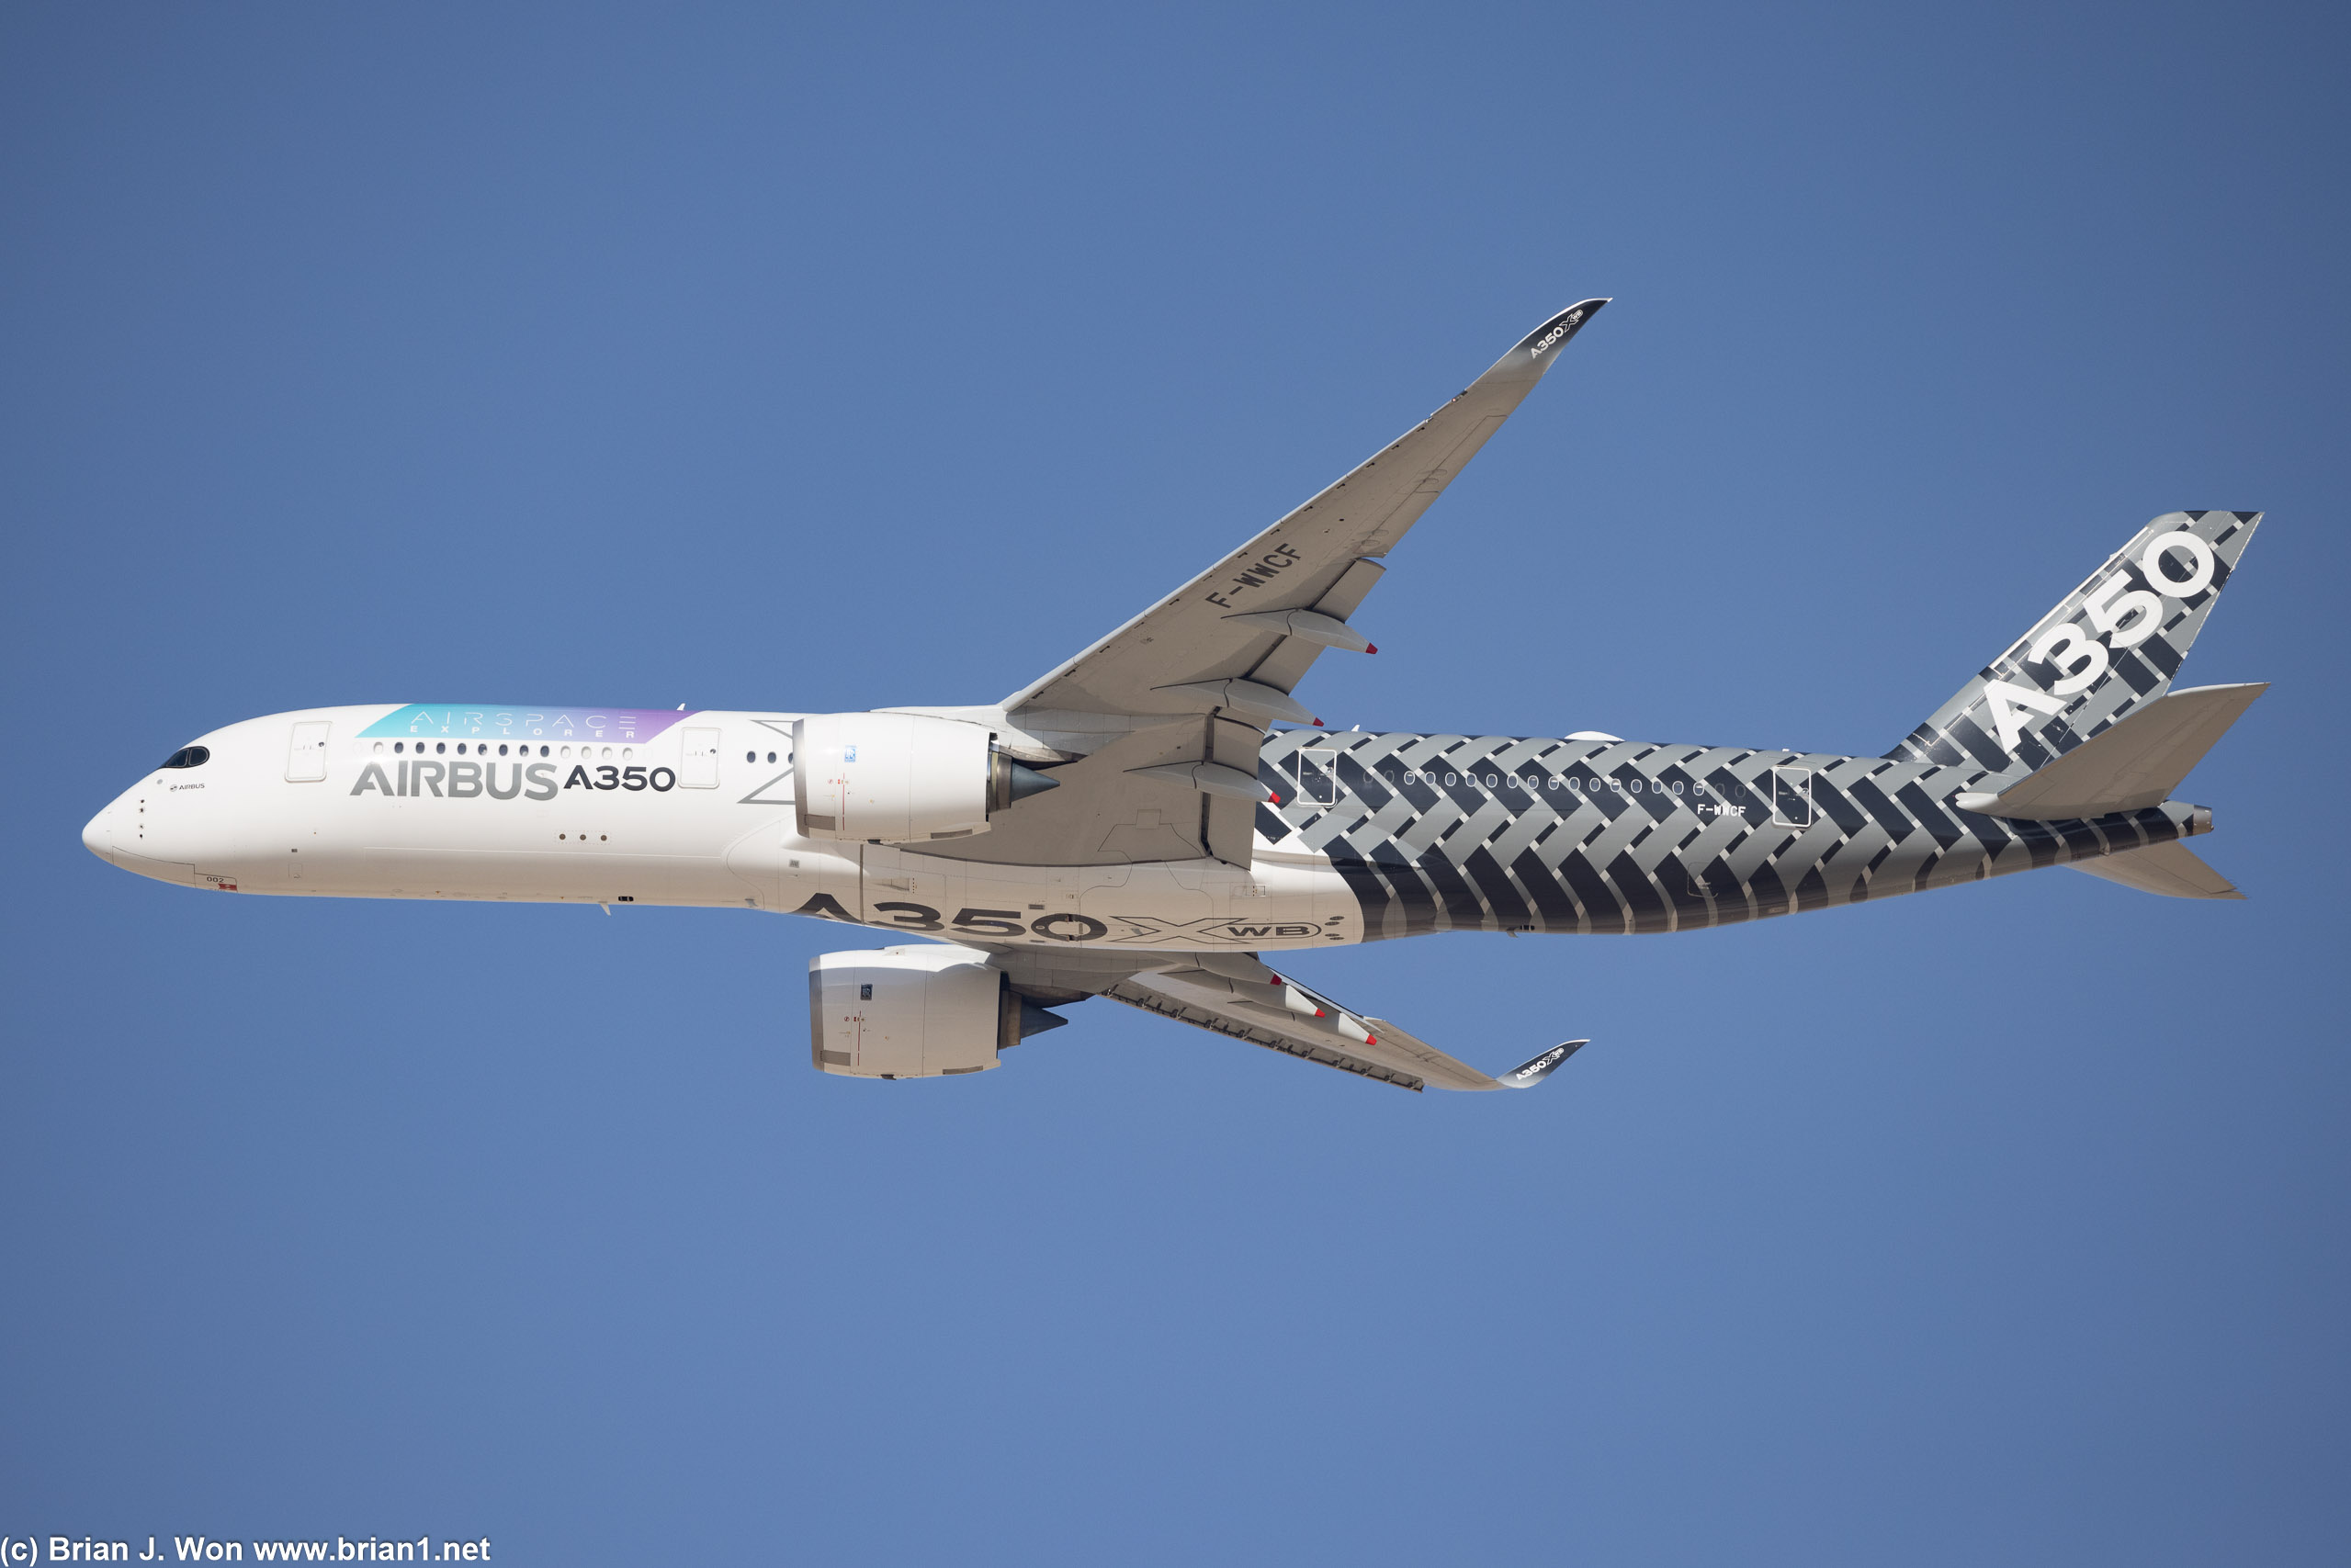 Airbus A350-900 prototype shows off its curved wingtips.